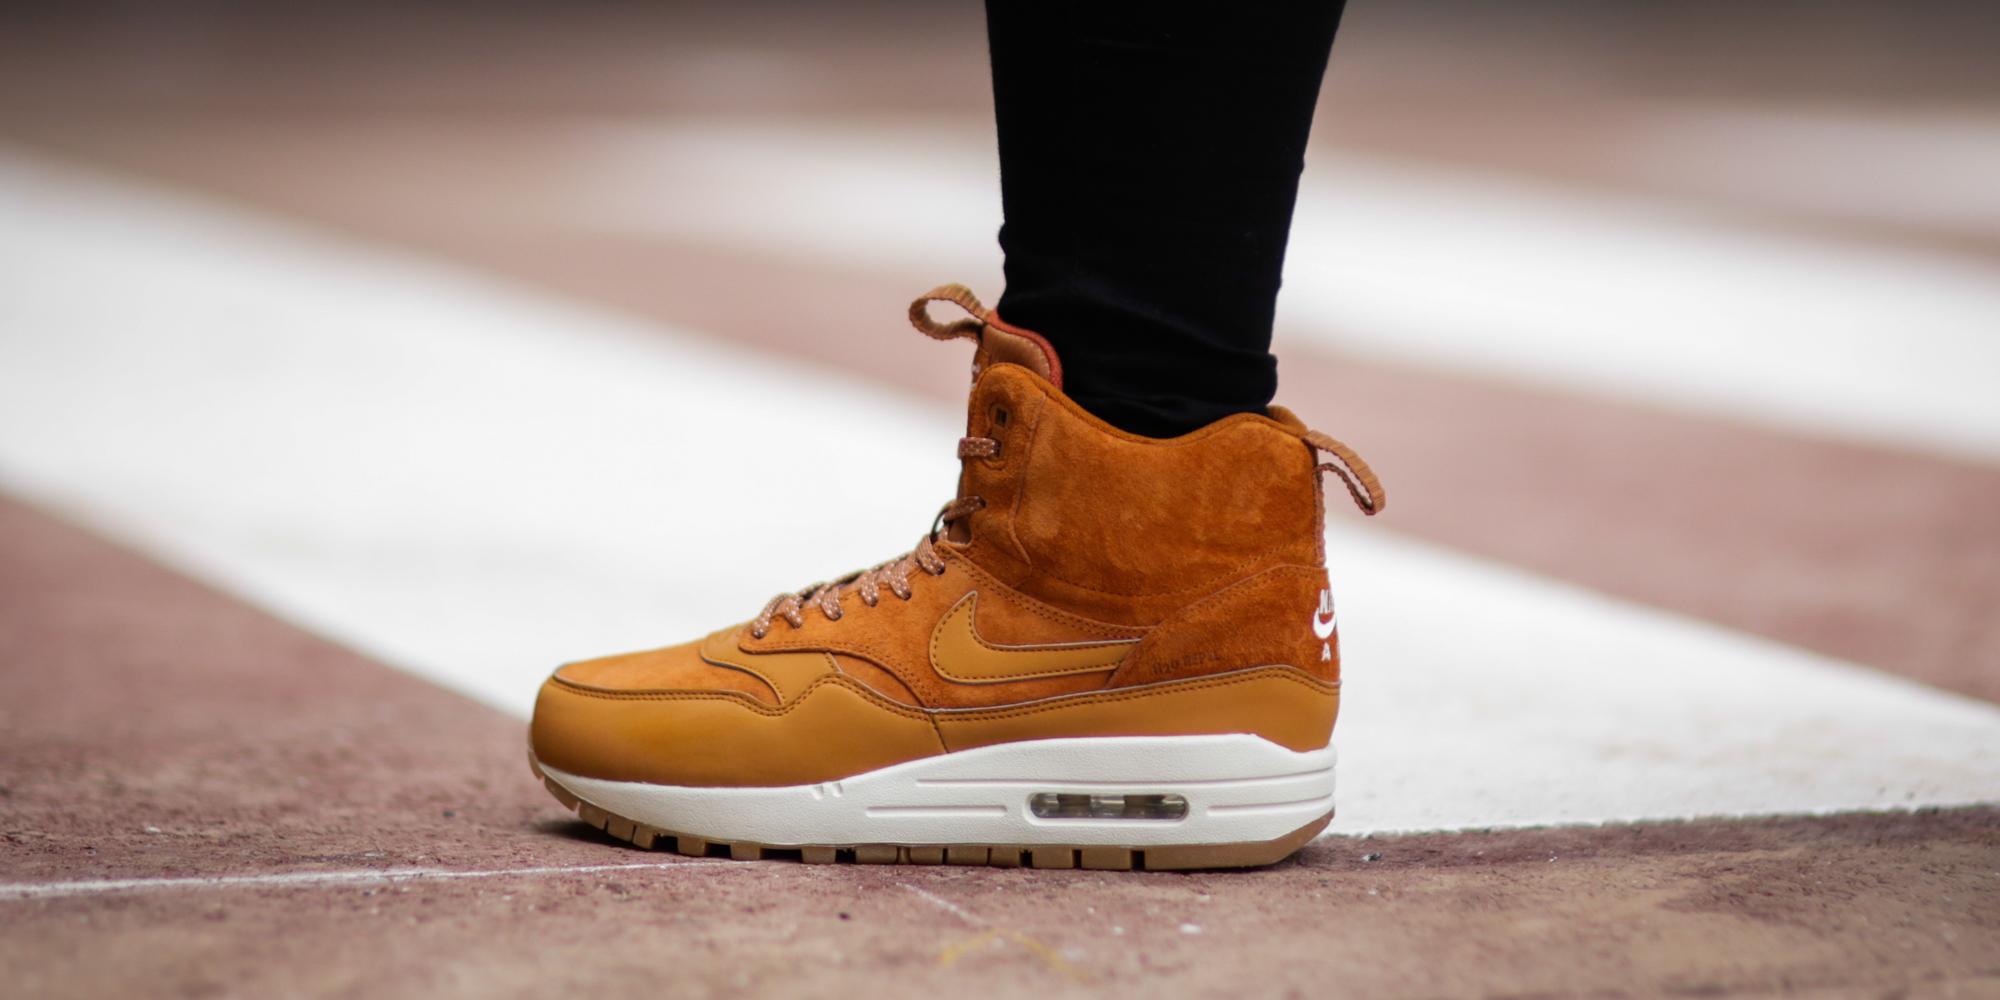 Personificación Carteles Ejemplo Foot Locker EU on Twitter: "The Women's Nike Air Max 1 Mid Sneakerboot in  Black and Tawny, drop Friday online &amp; in store #approved  http://t.co/aHcvsJOxse" / Twitter